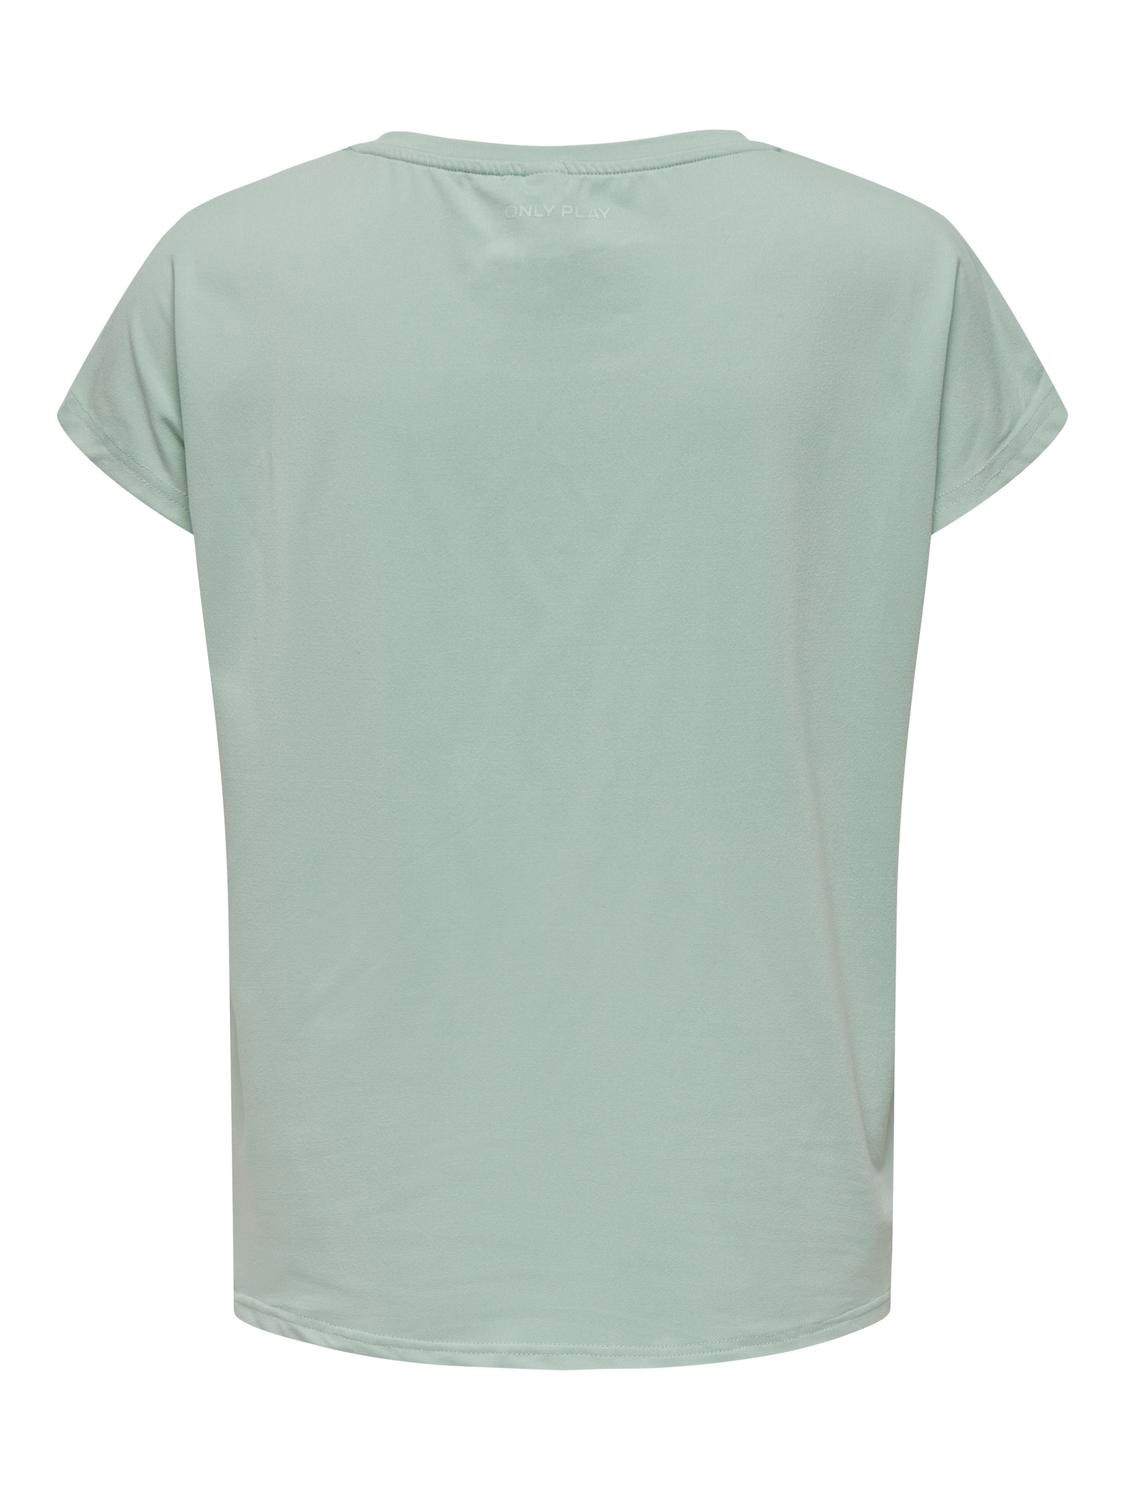 ONLY Loose Fit Round Neck Batwing sleeves T-Shirt -Frosty Green - 15137012